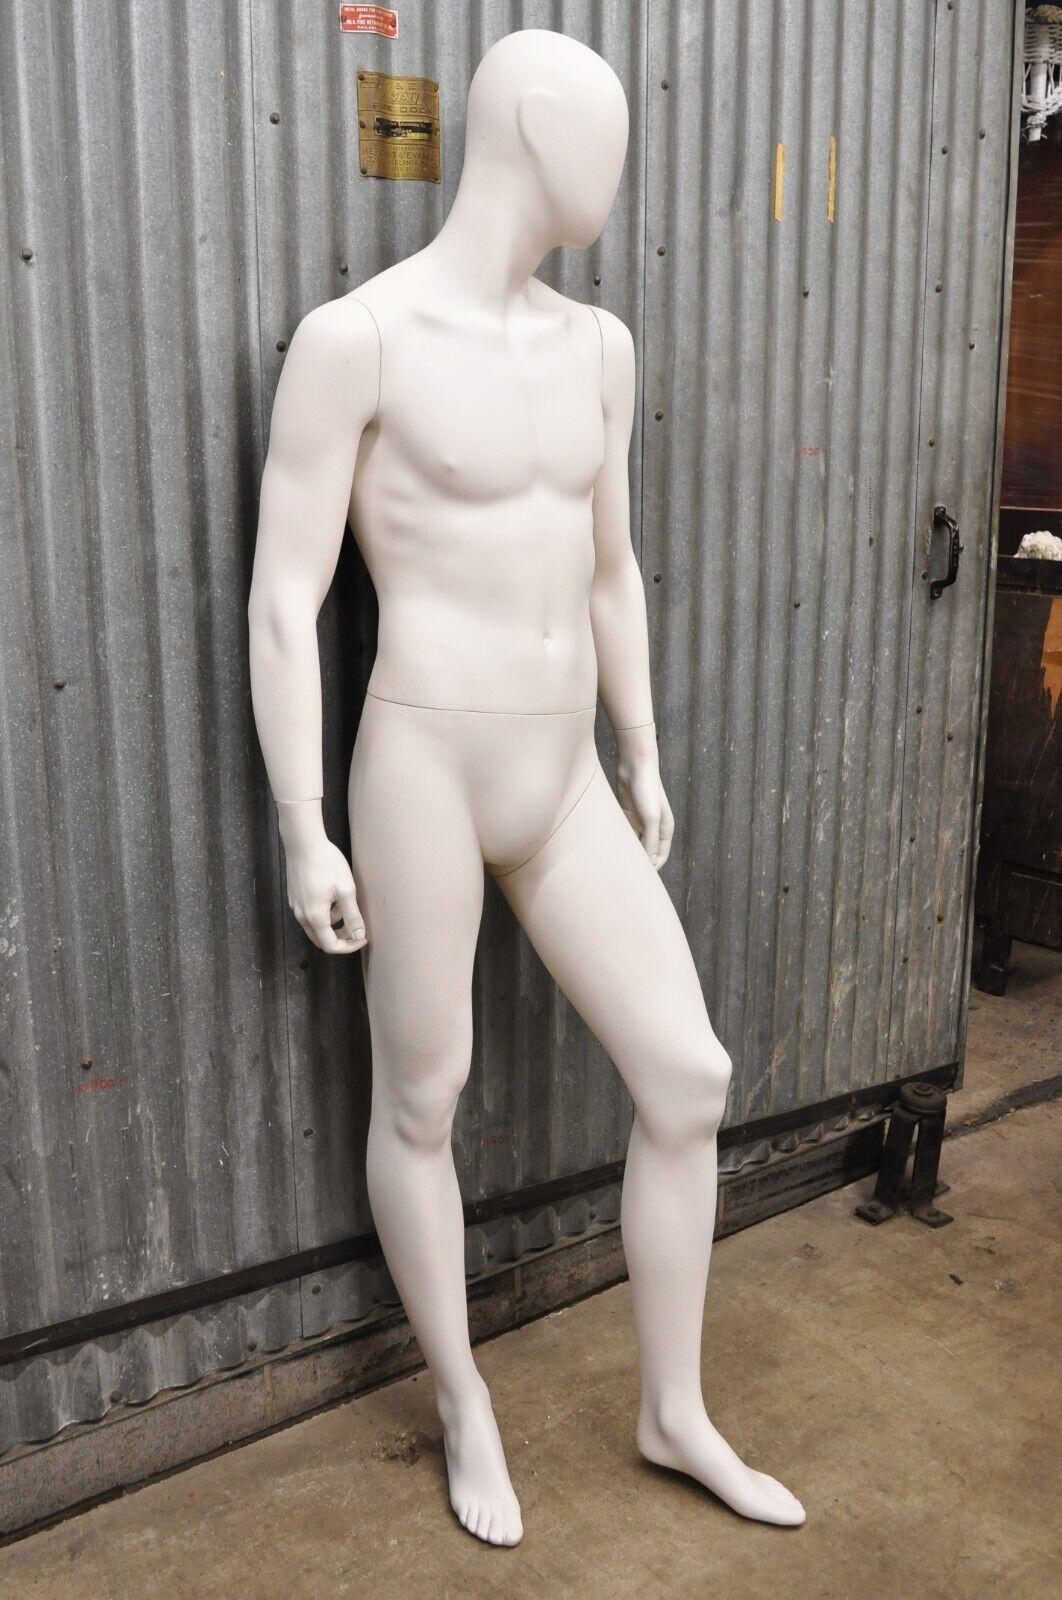 Male fiberglass white matte finish full body display mannequin by Almax (A).
Item featured has an Egg head, 5 piece assembly, original box, not free standing, does not include base. Does not free stand. Circa 20th to 21st century. Measurements: 74